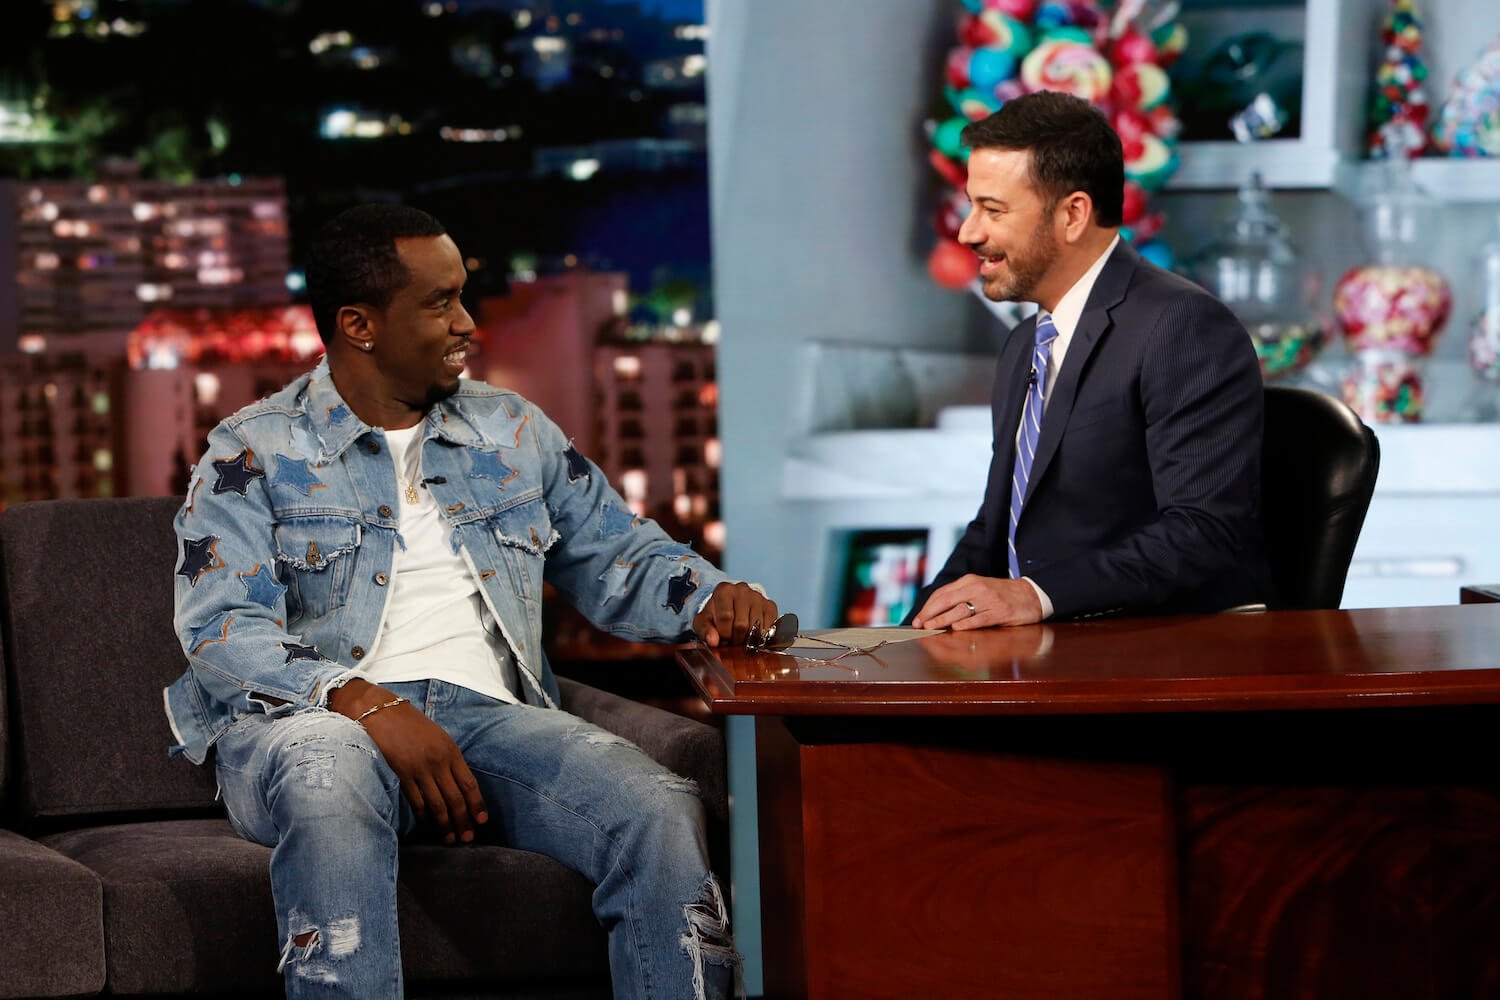 Sean 'P. Diddy' Combs laughing next to Jimmy Kimmel on 'Jimmy Kimmel Live!'